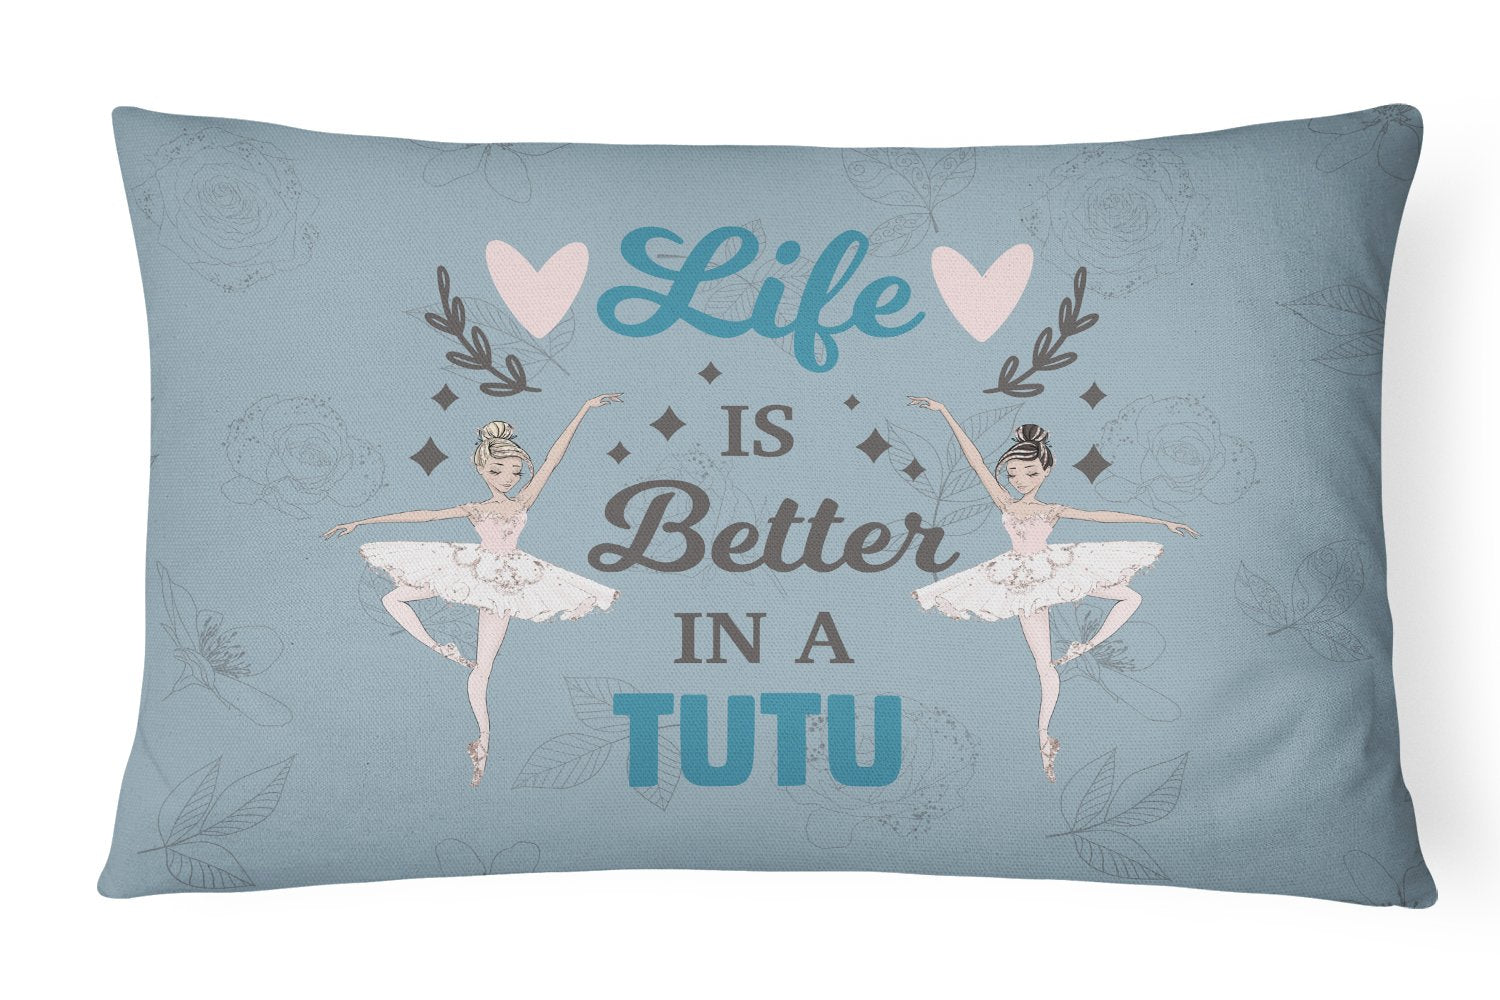 Buy this Life is Better in a Tutu Dance Canvas Fabric Decorative Pillow